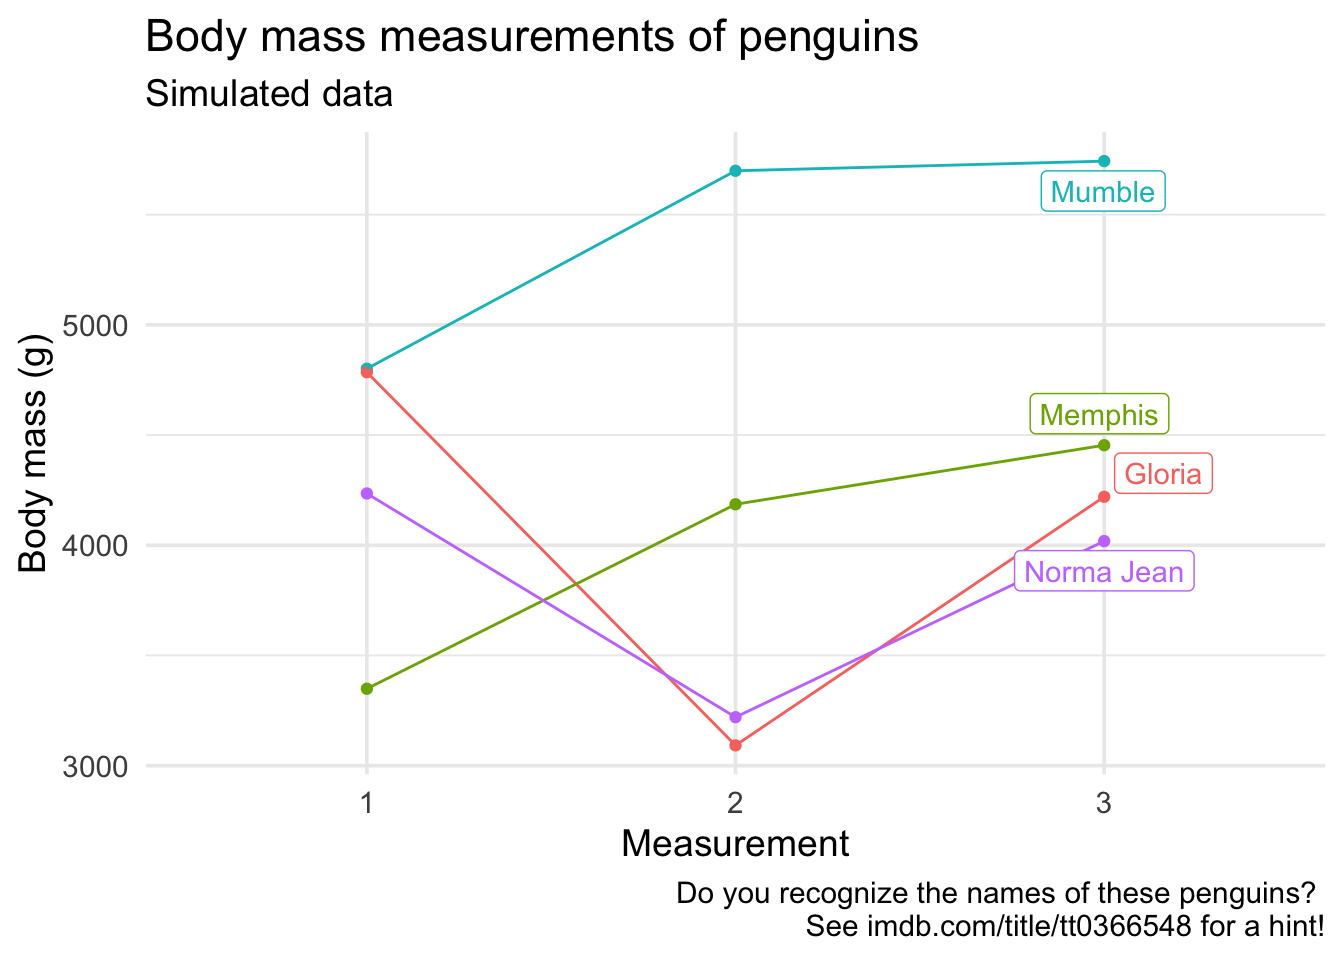 Line plot of body mass measurements, where each measurement is represented by a point, and measurements from each penguin are connected with a line, and each penguin's name is directly labelled on the plot.